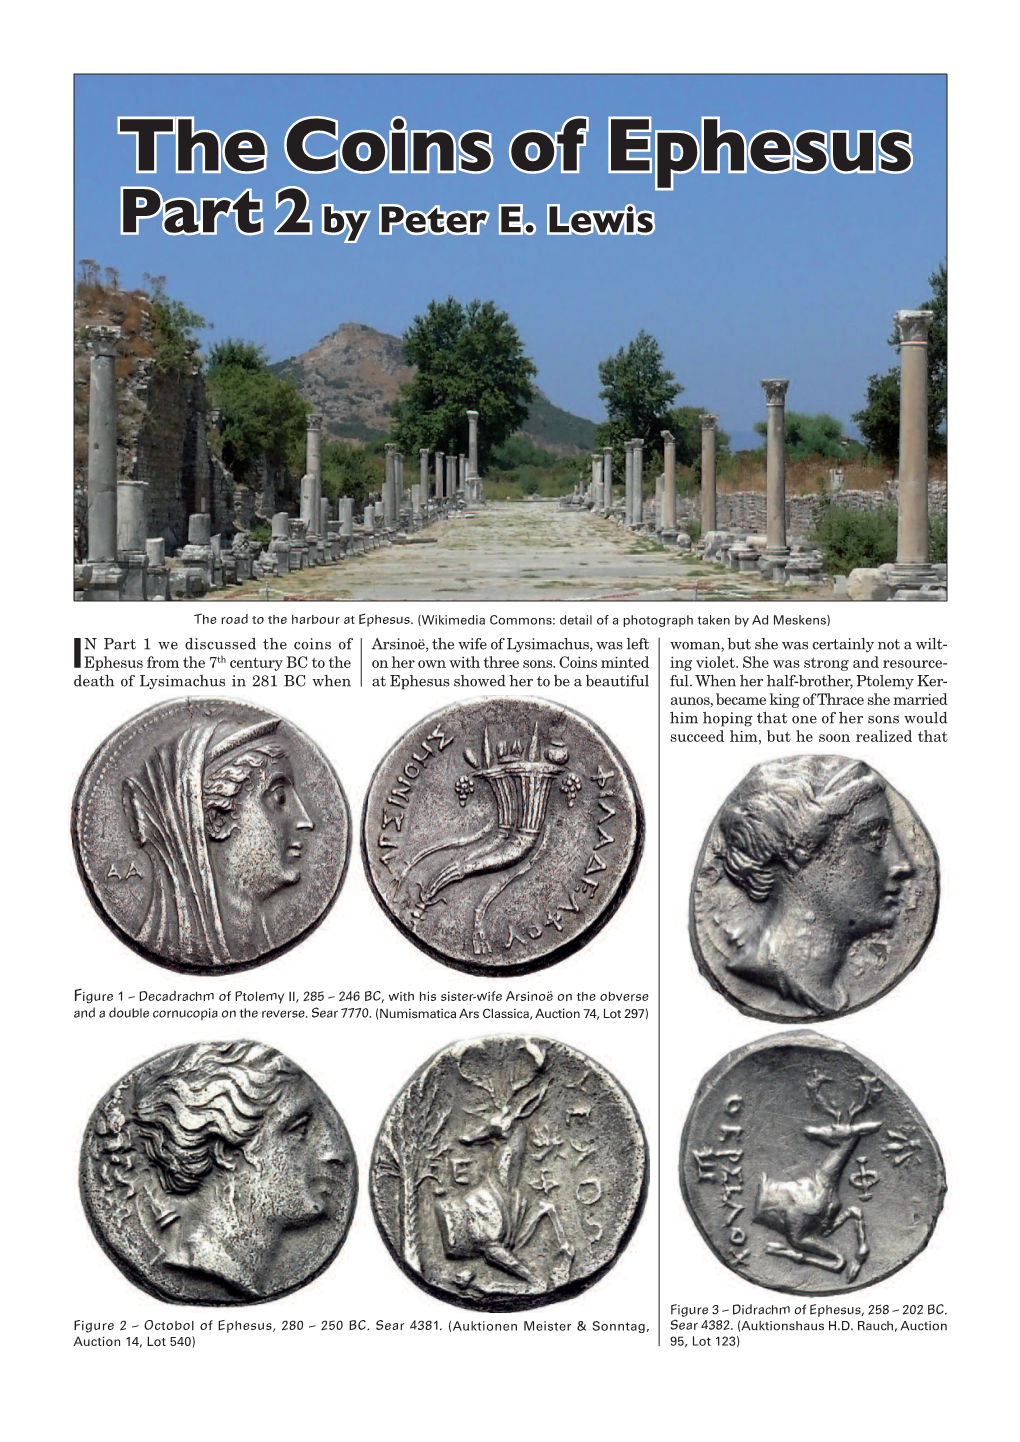 IN Part 1 We Discussed the Coins of Ephesus from the 7Th Century BC To